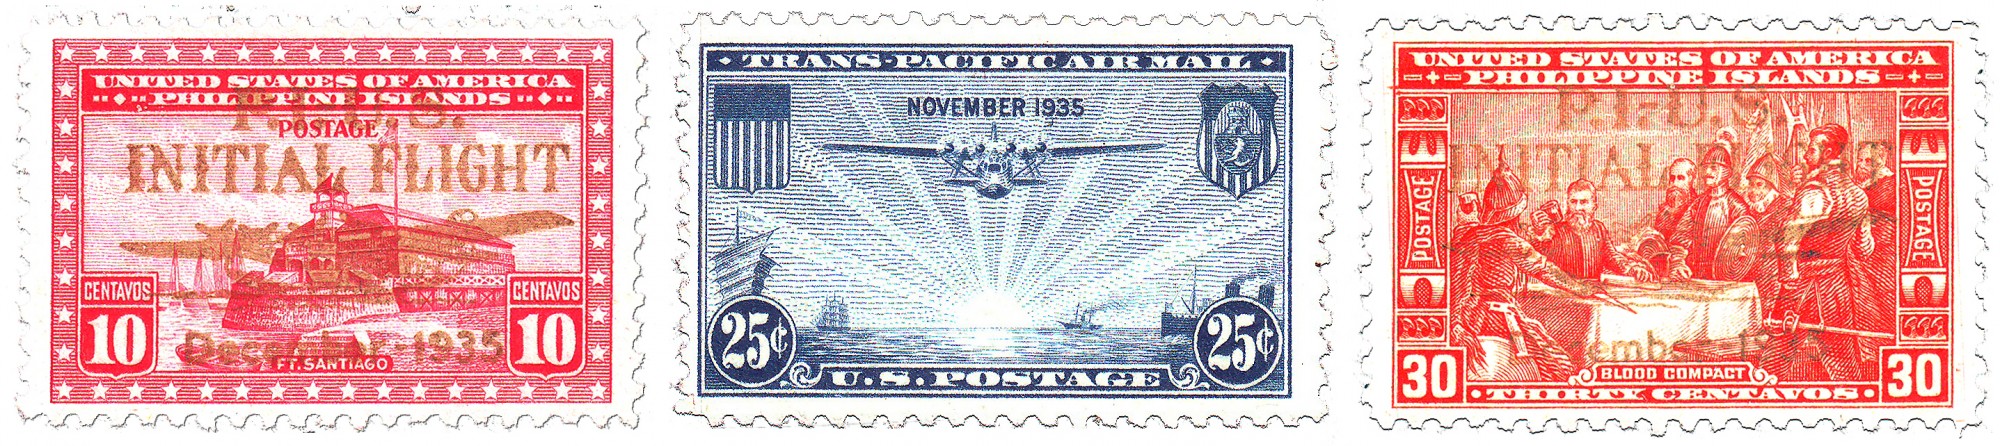 US and PI First Transpacific Air Mail Stamps 1935